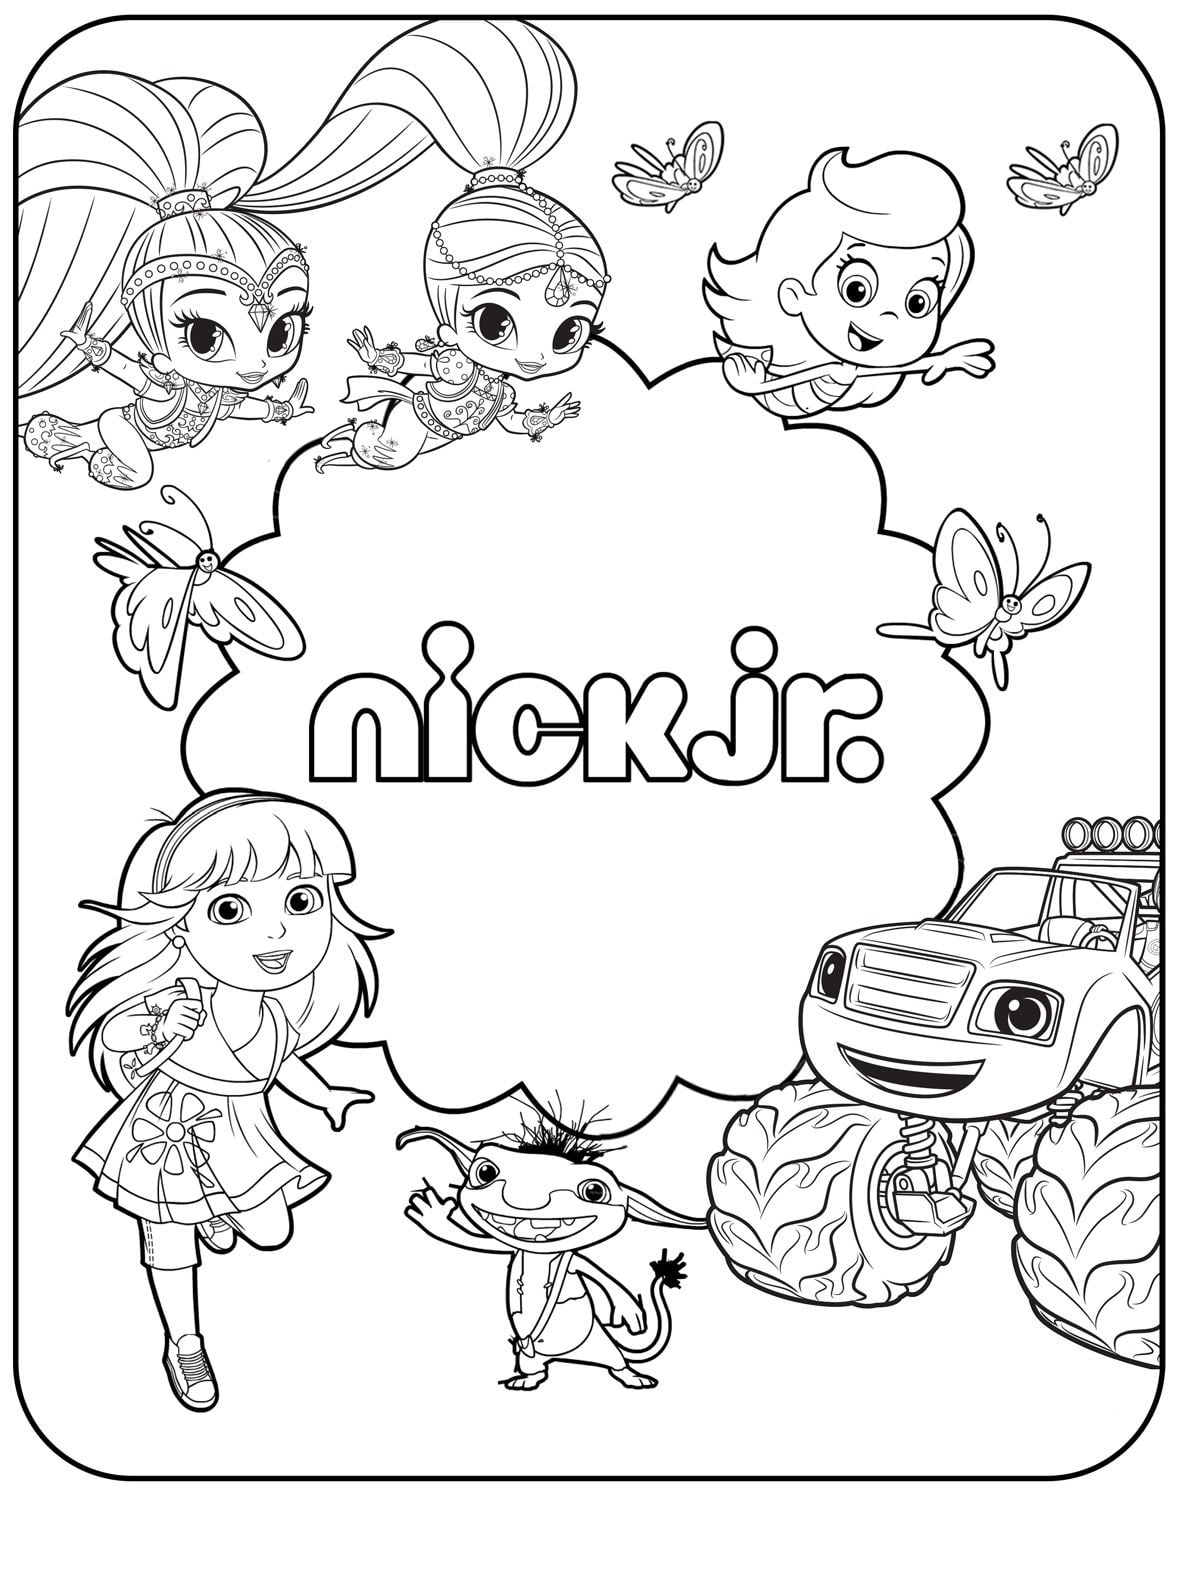 Nickelodeon Coloring Pages Pdf To Print Coloringfolder Nick Jr Coloring Pages Cartoon Coloring Pages Coloring Pages Inspirational